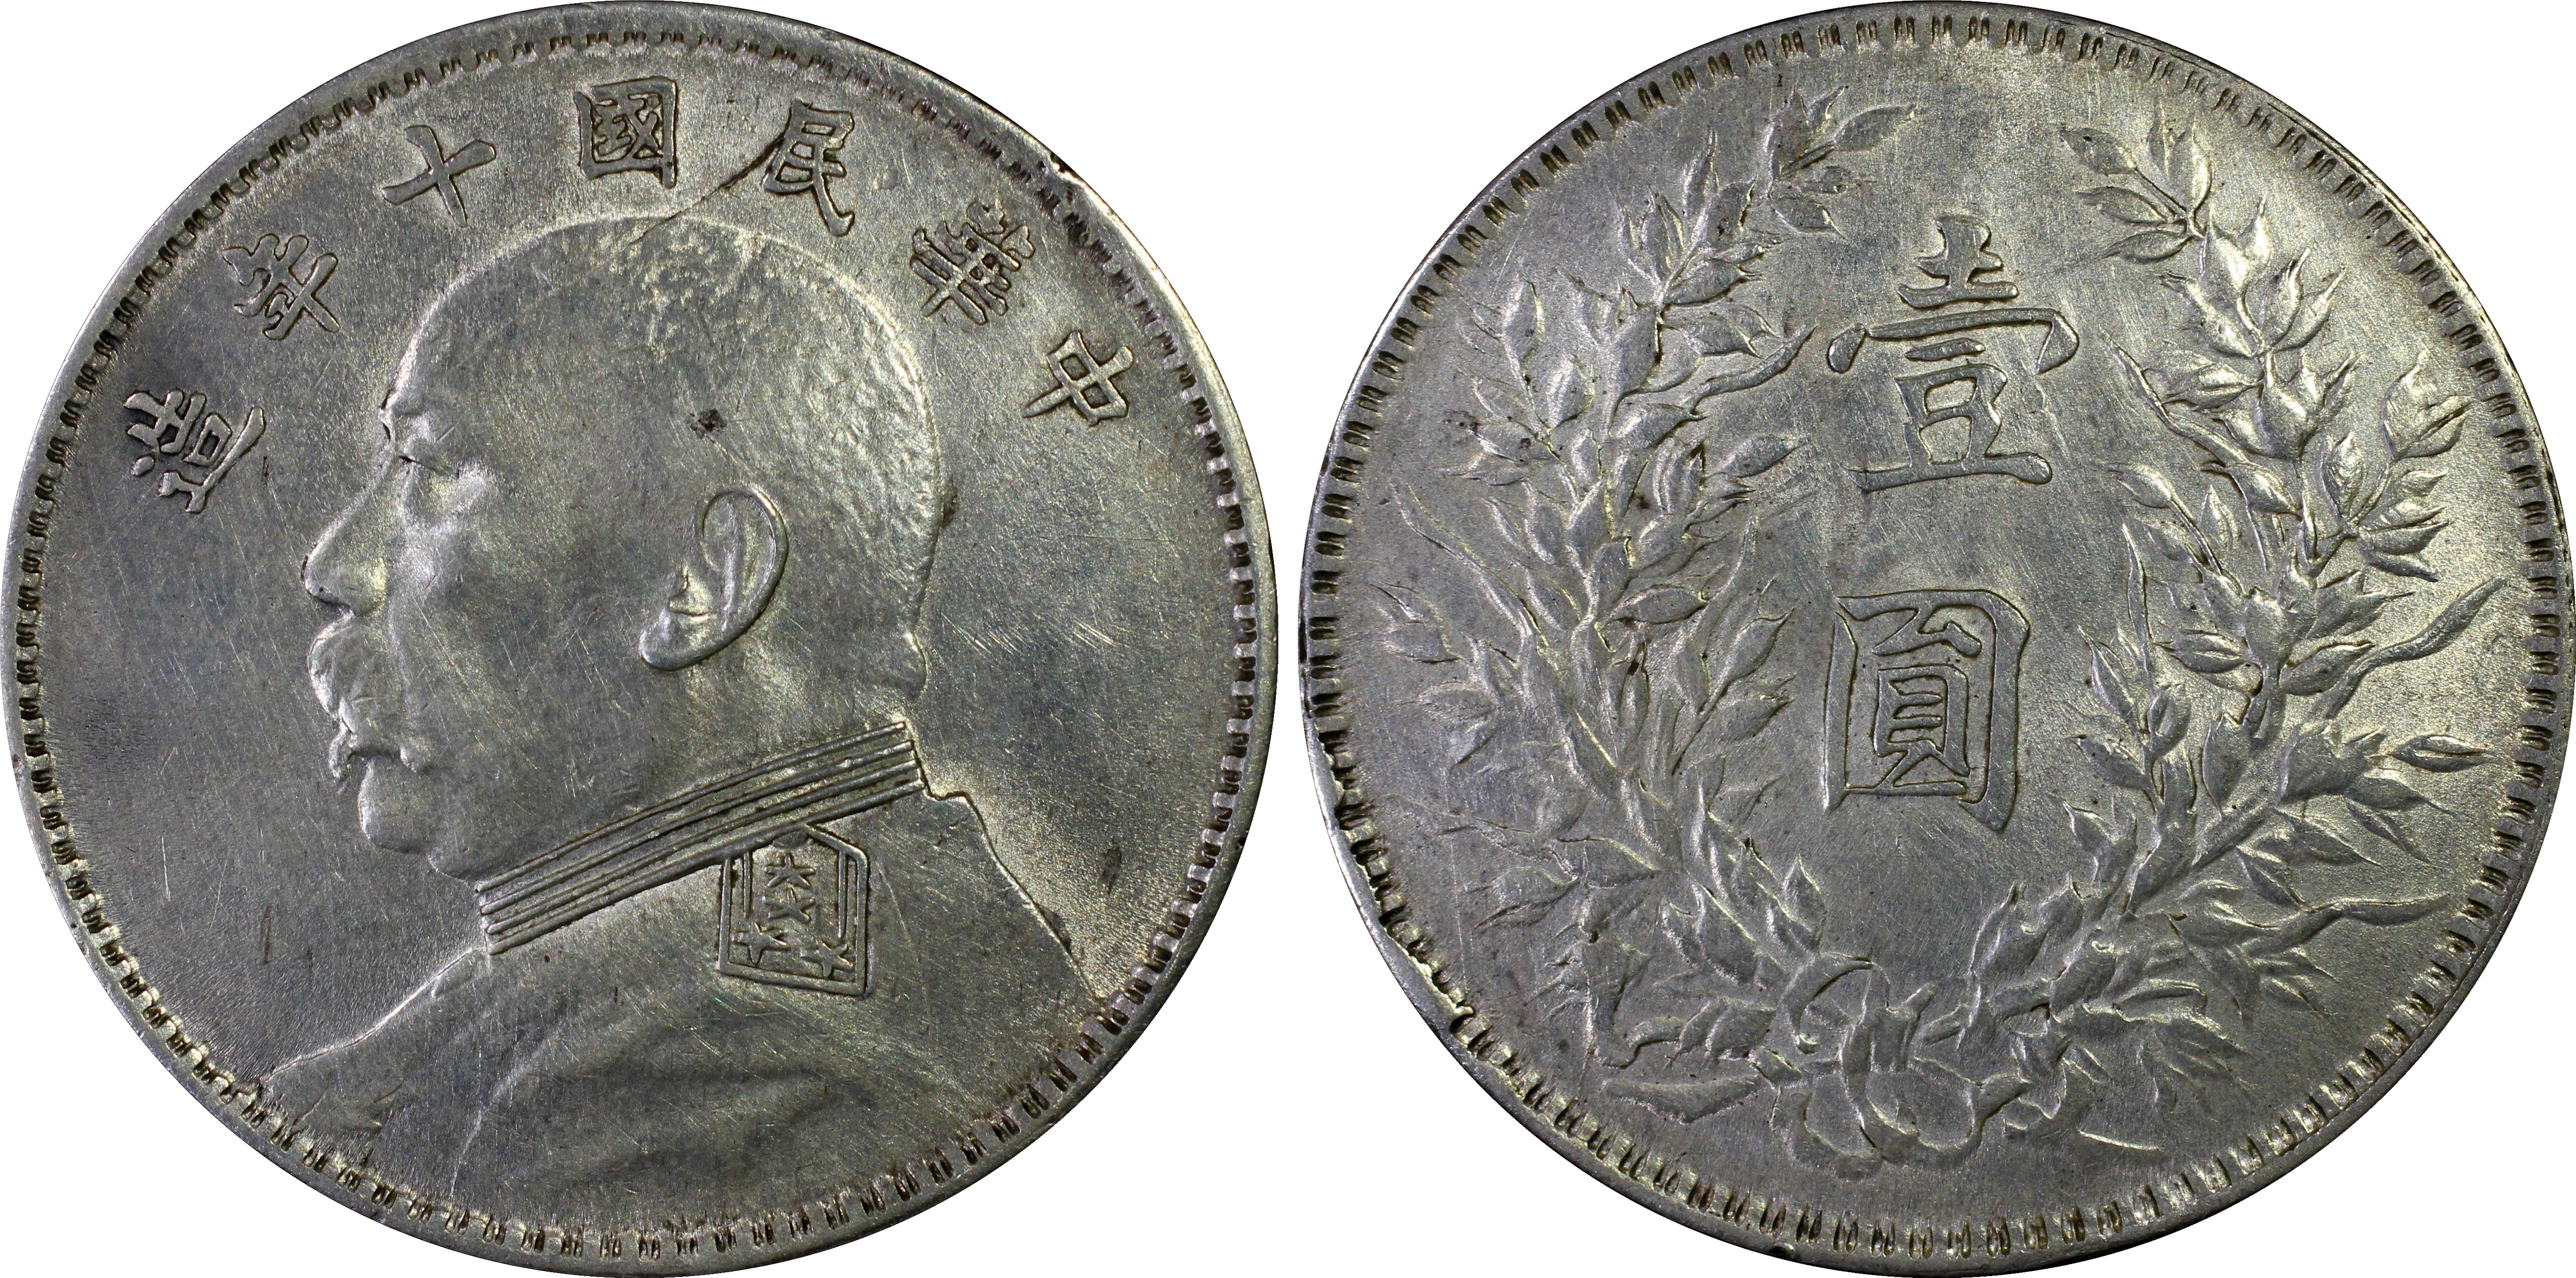 PCGS Set Registry - Collectors Showcase: my chinese coin